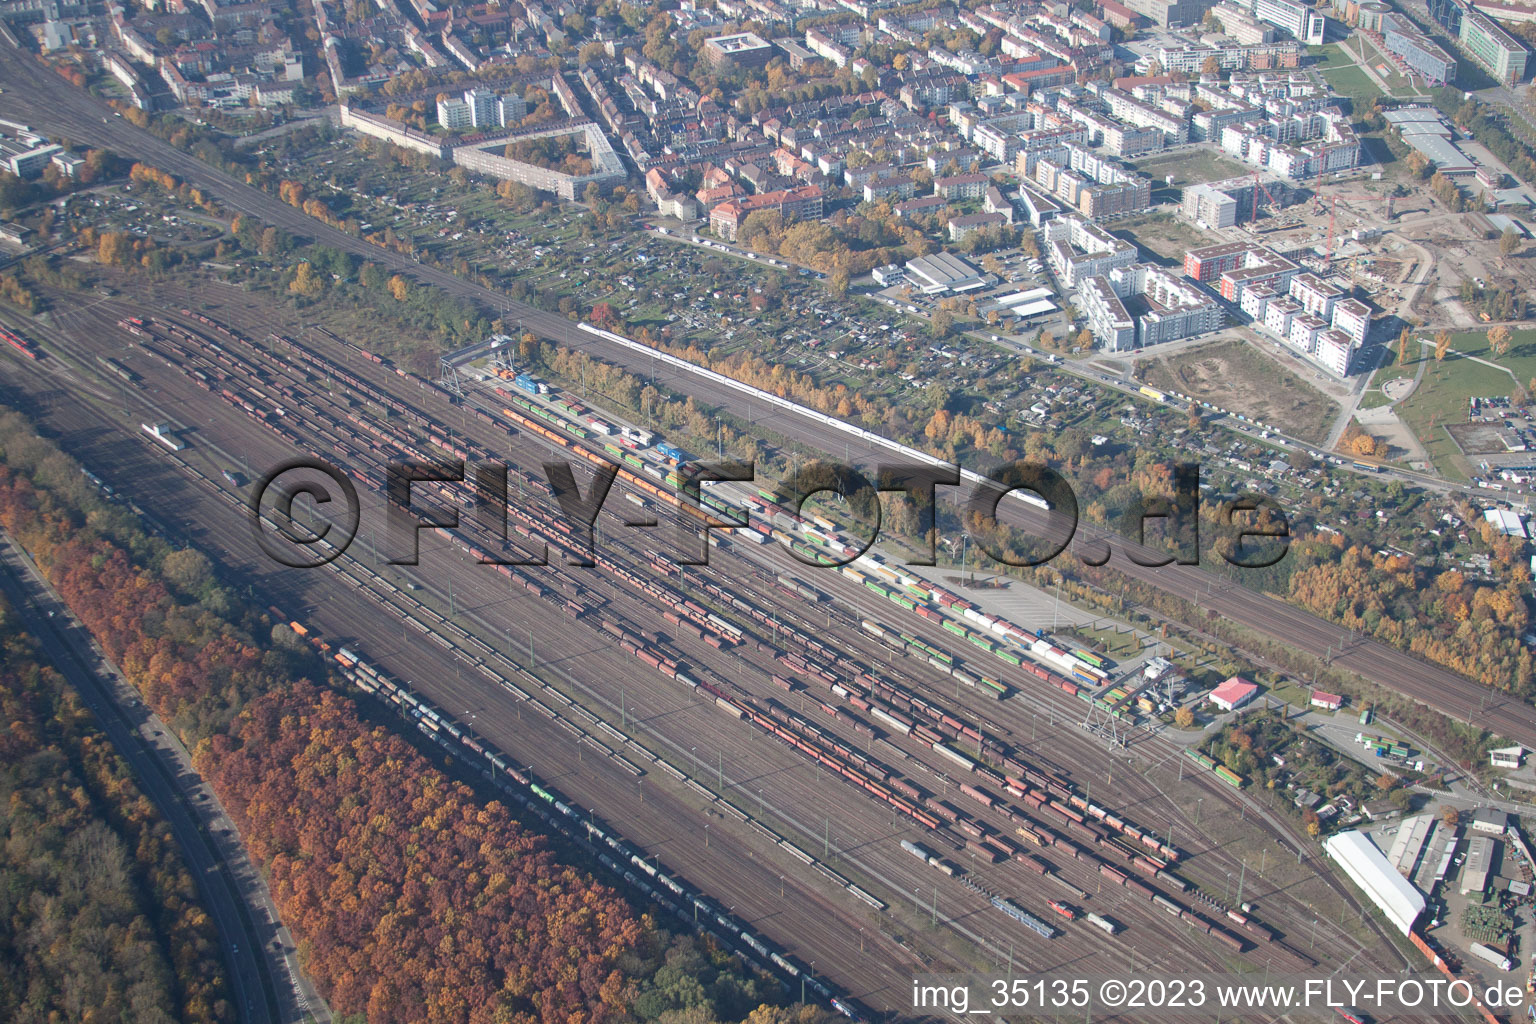 Oblique view of Freight depot in the district Südstadt in Karlsruhe in the state Baden-Wuerttemberg, Germany